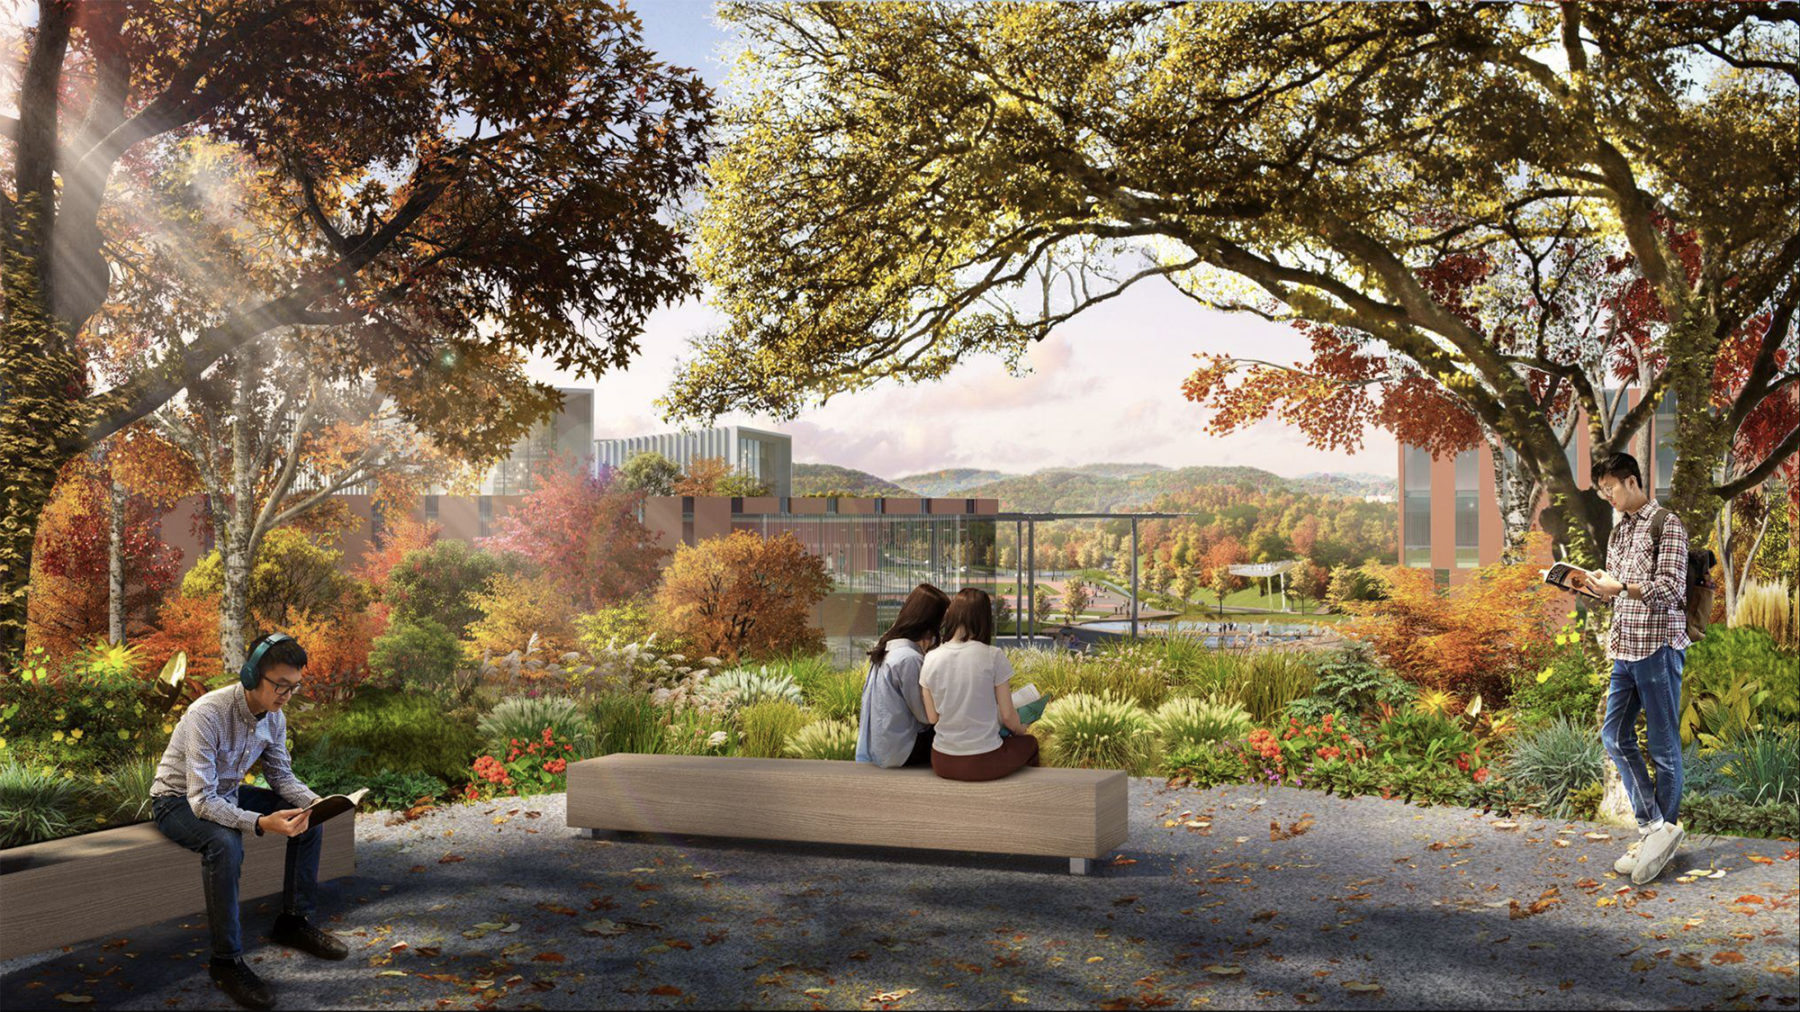 Rendering of a fall landscape at Xinyang University. People are sitting on benches and reading.